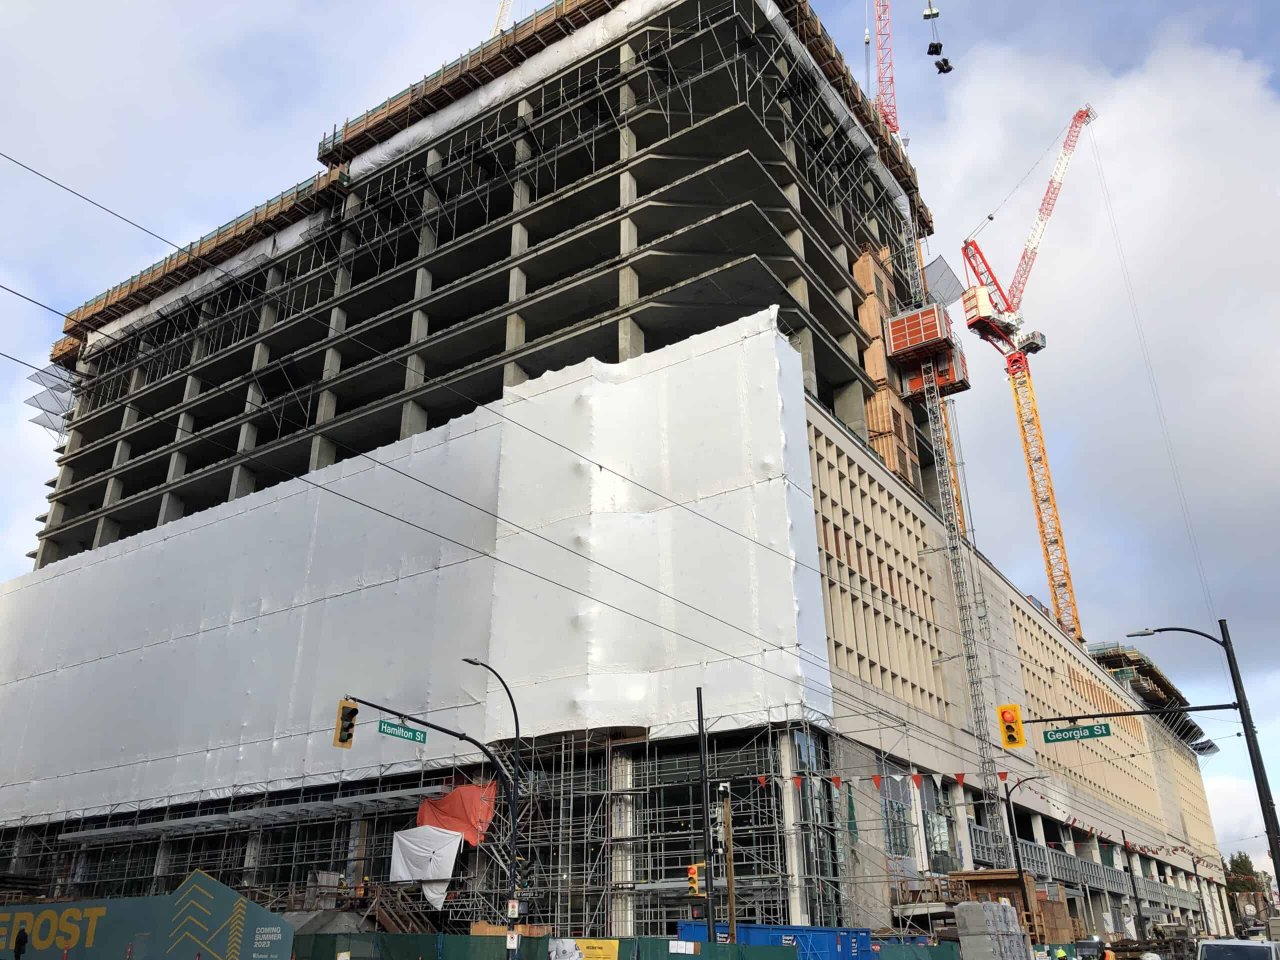 Former Post Office on 349 W Georgia St under construction on December 17, 2020. Credit: S Carlson